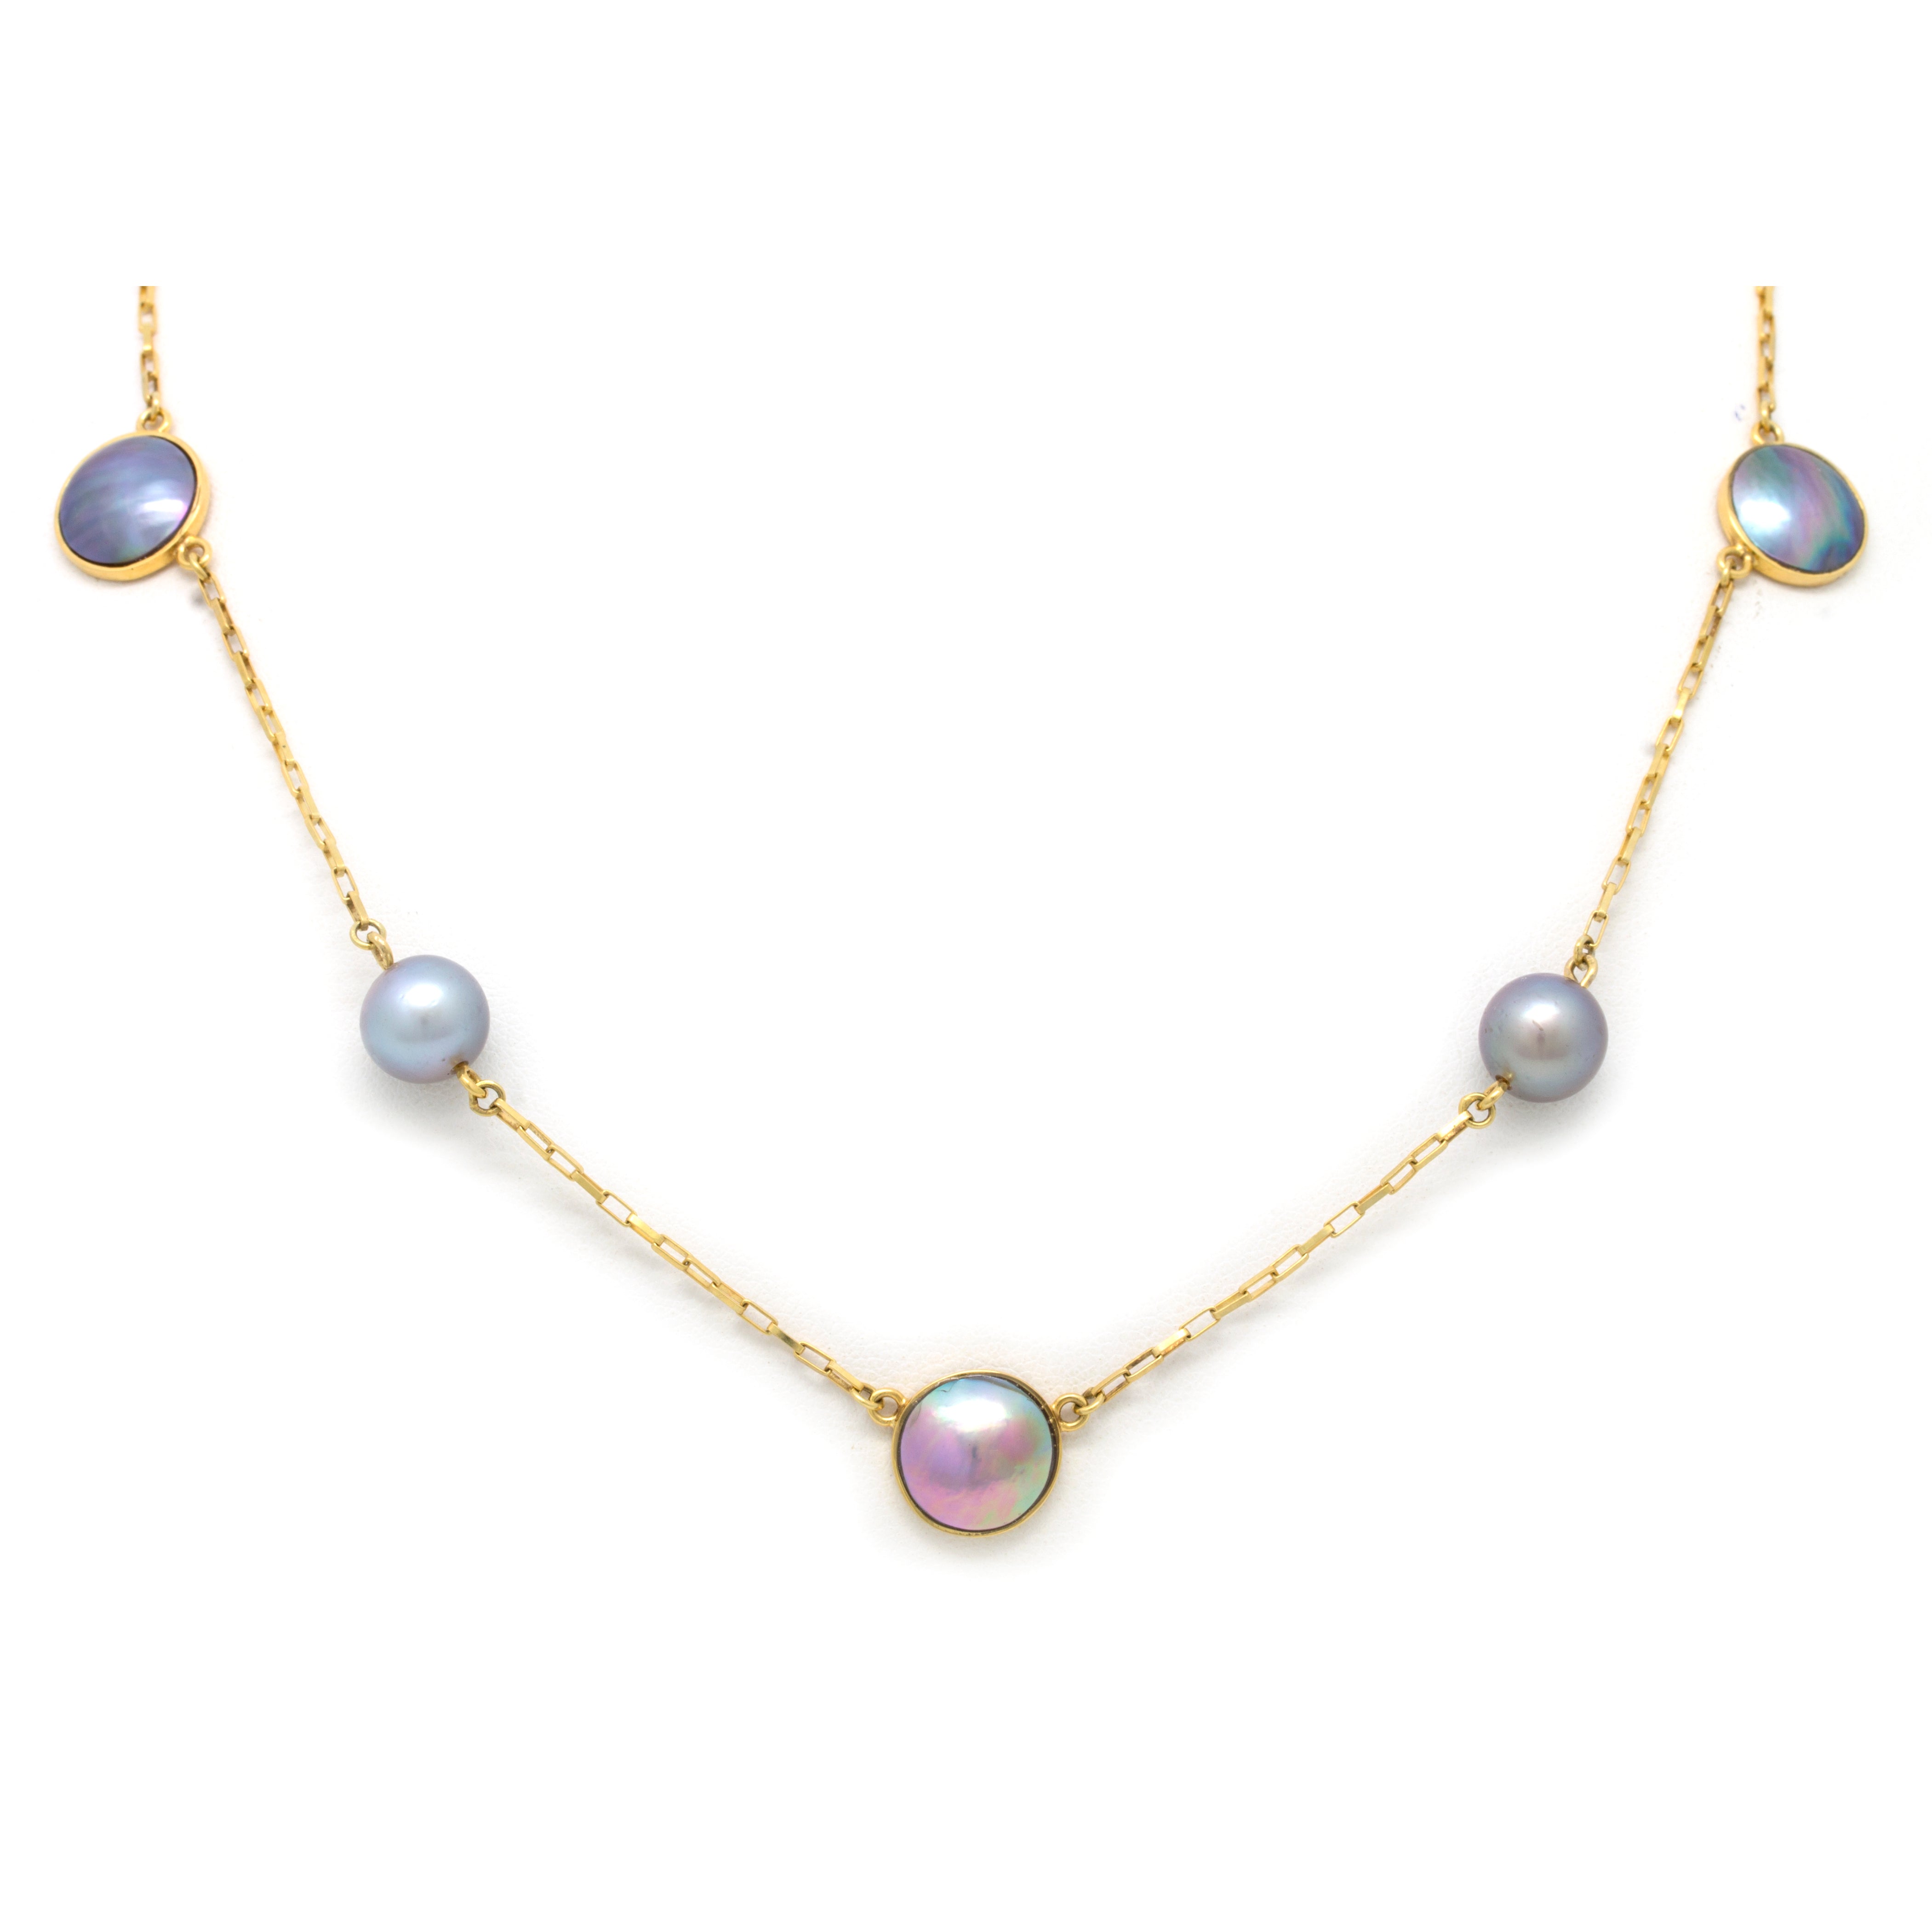 14K Yellow Gold Necklace with Cortez Pearls